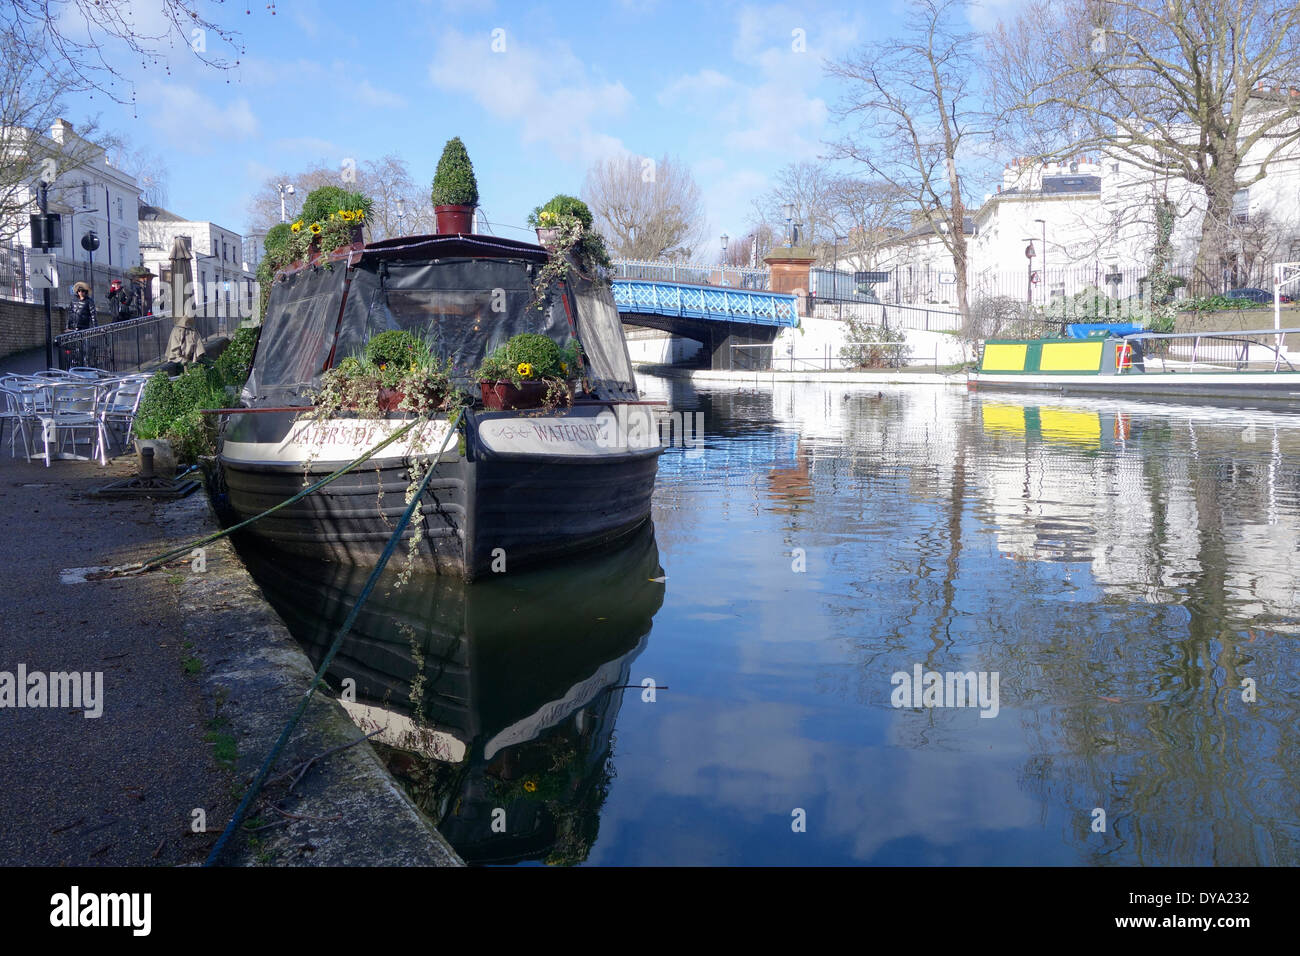 England, London, Little Venice. The Waterside cafe canal boat on the Paddington arm of the Grand Union canal. Stock Photo